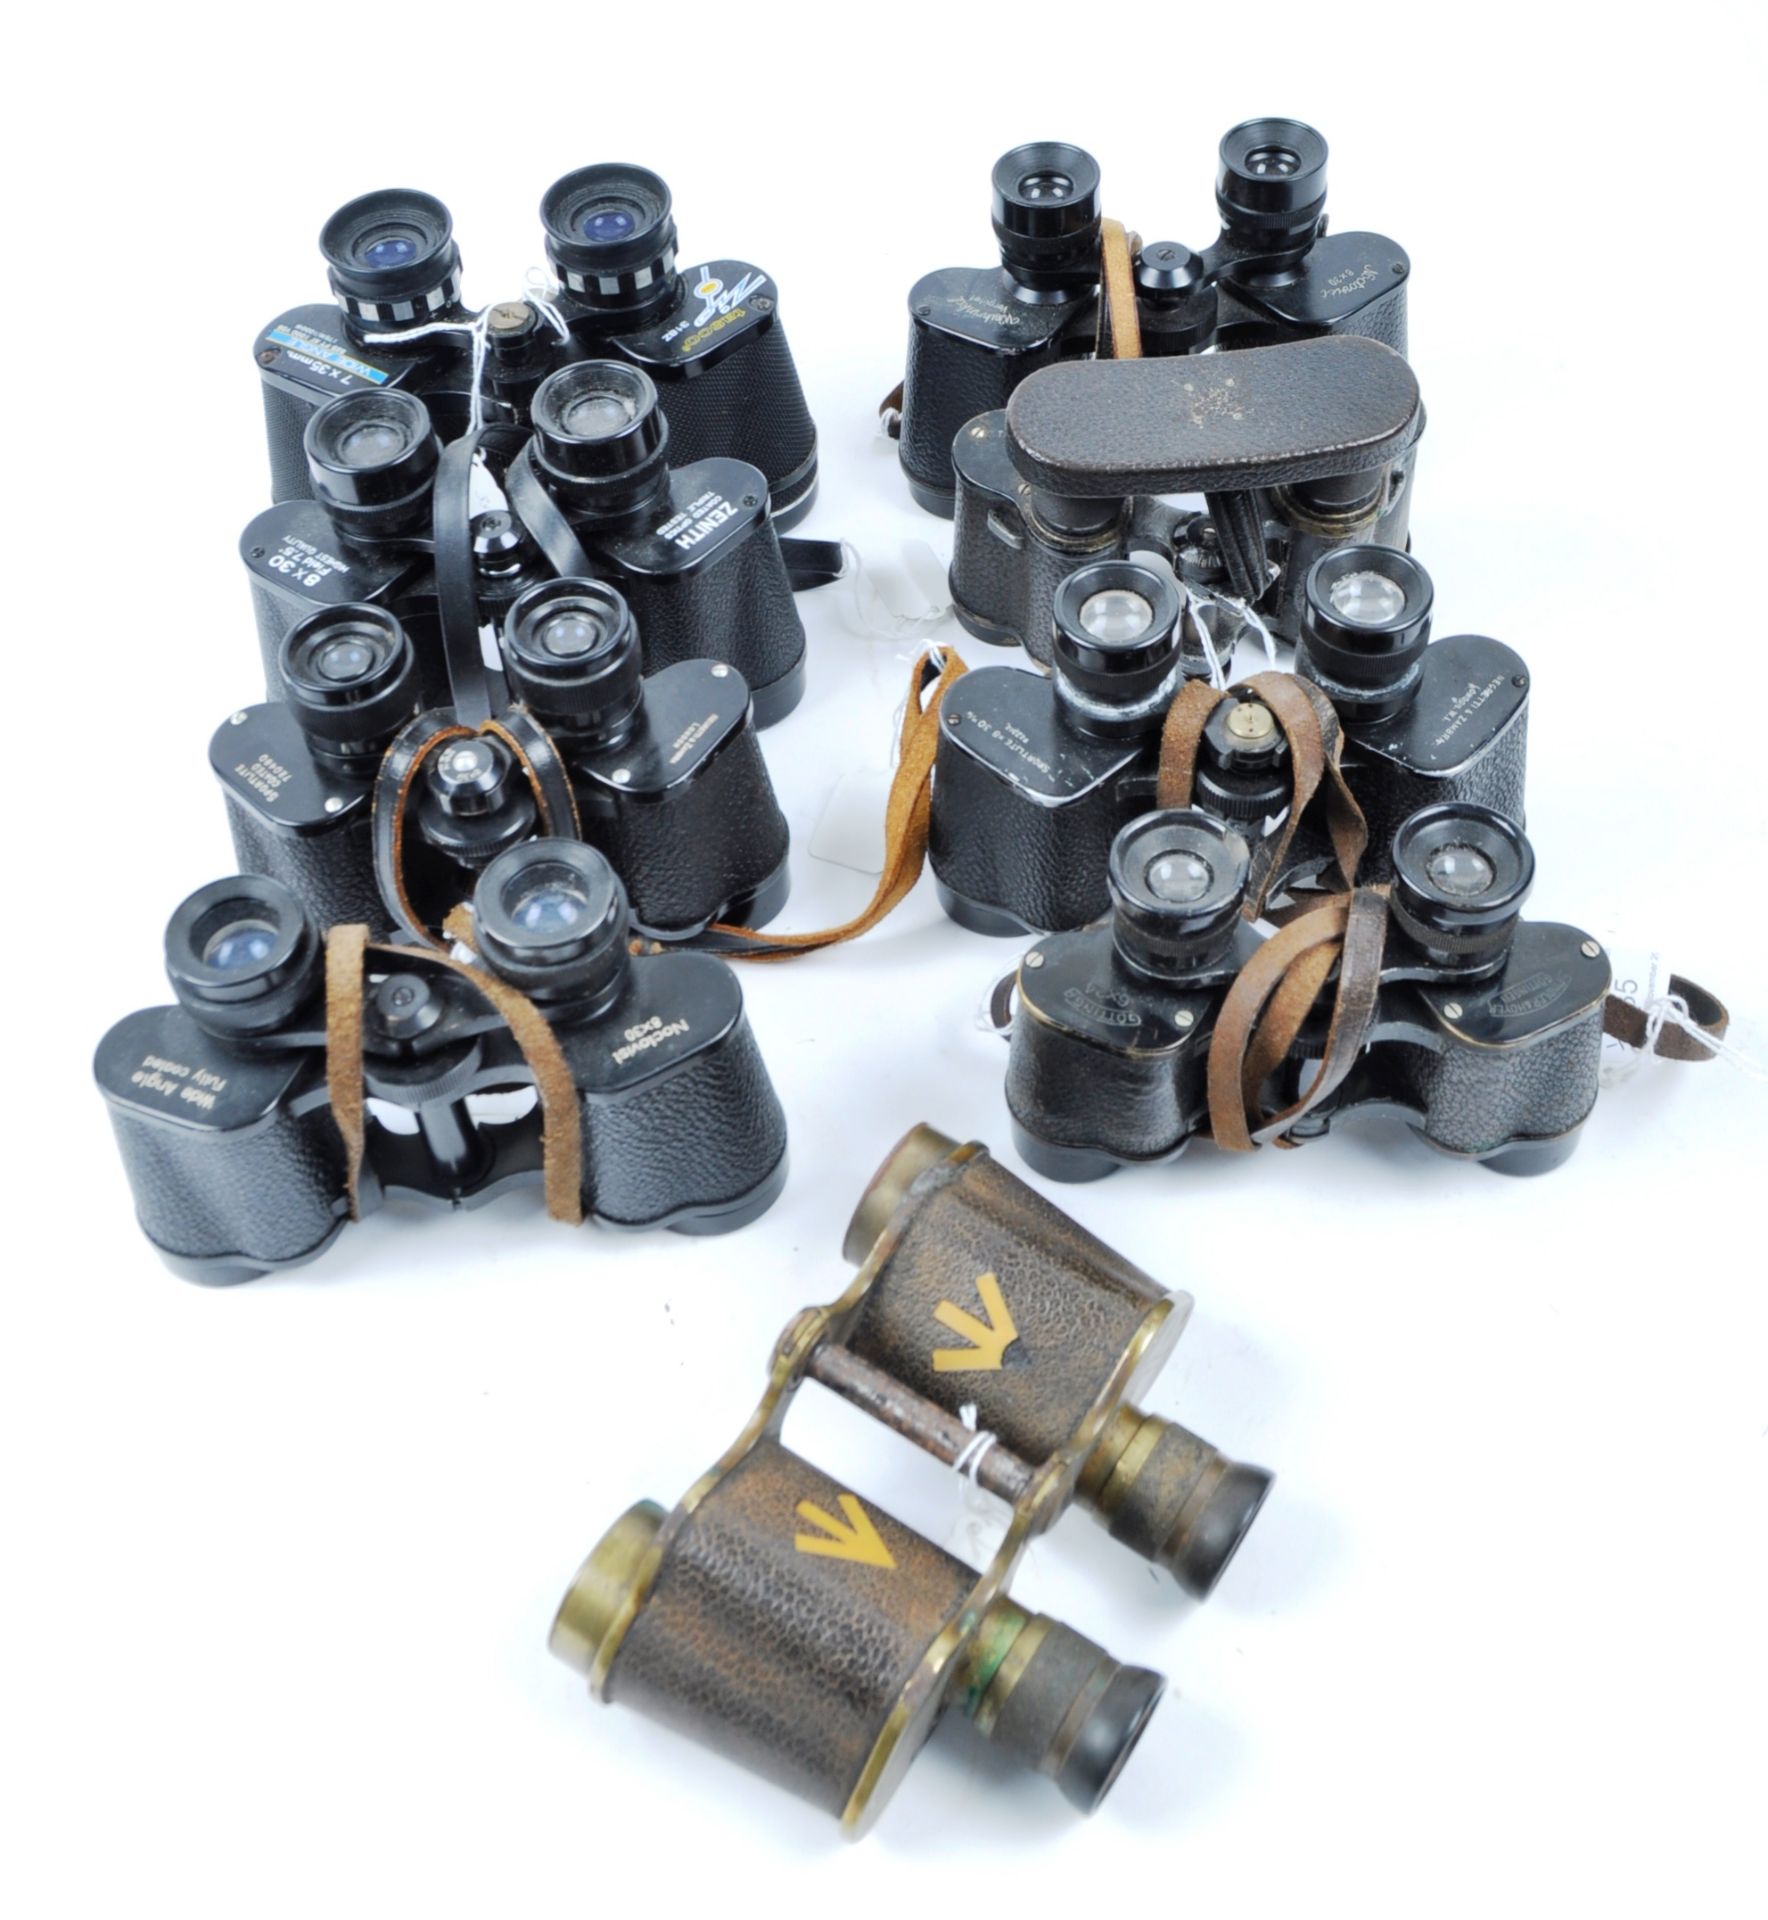 COLLECTION OF ASSORTED VINTAGE BINOCULARS INCLUDING MILITARY ISSUE - Image 2 of 5